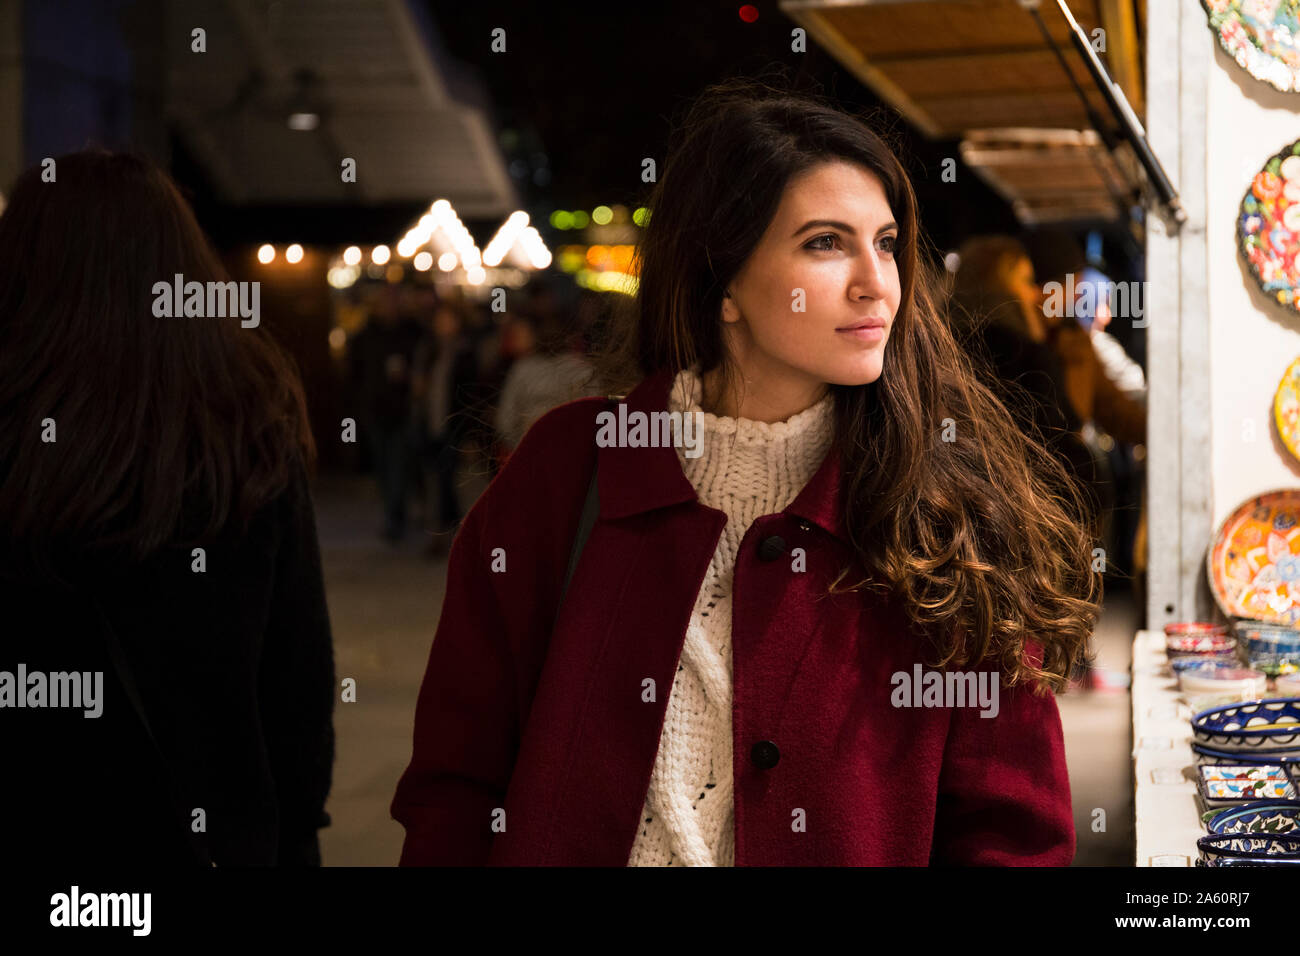 Portrait of young woman at Christmas market Stock Photo